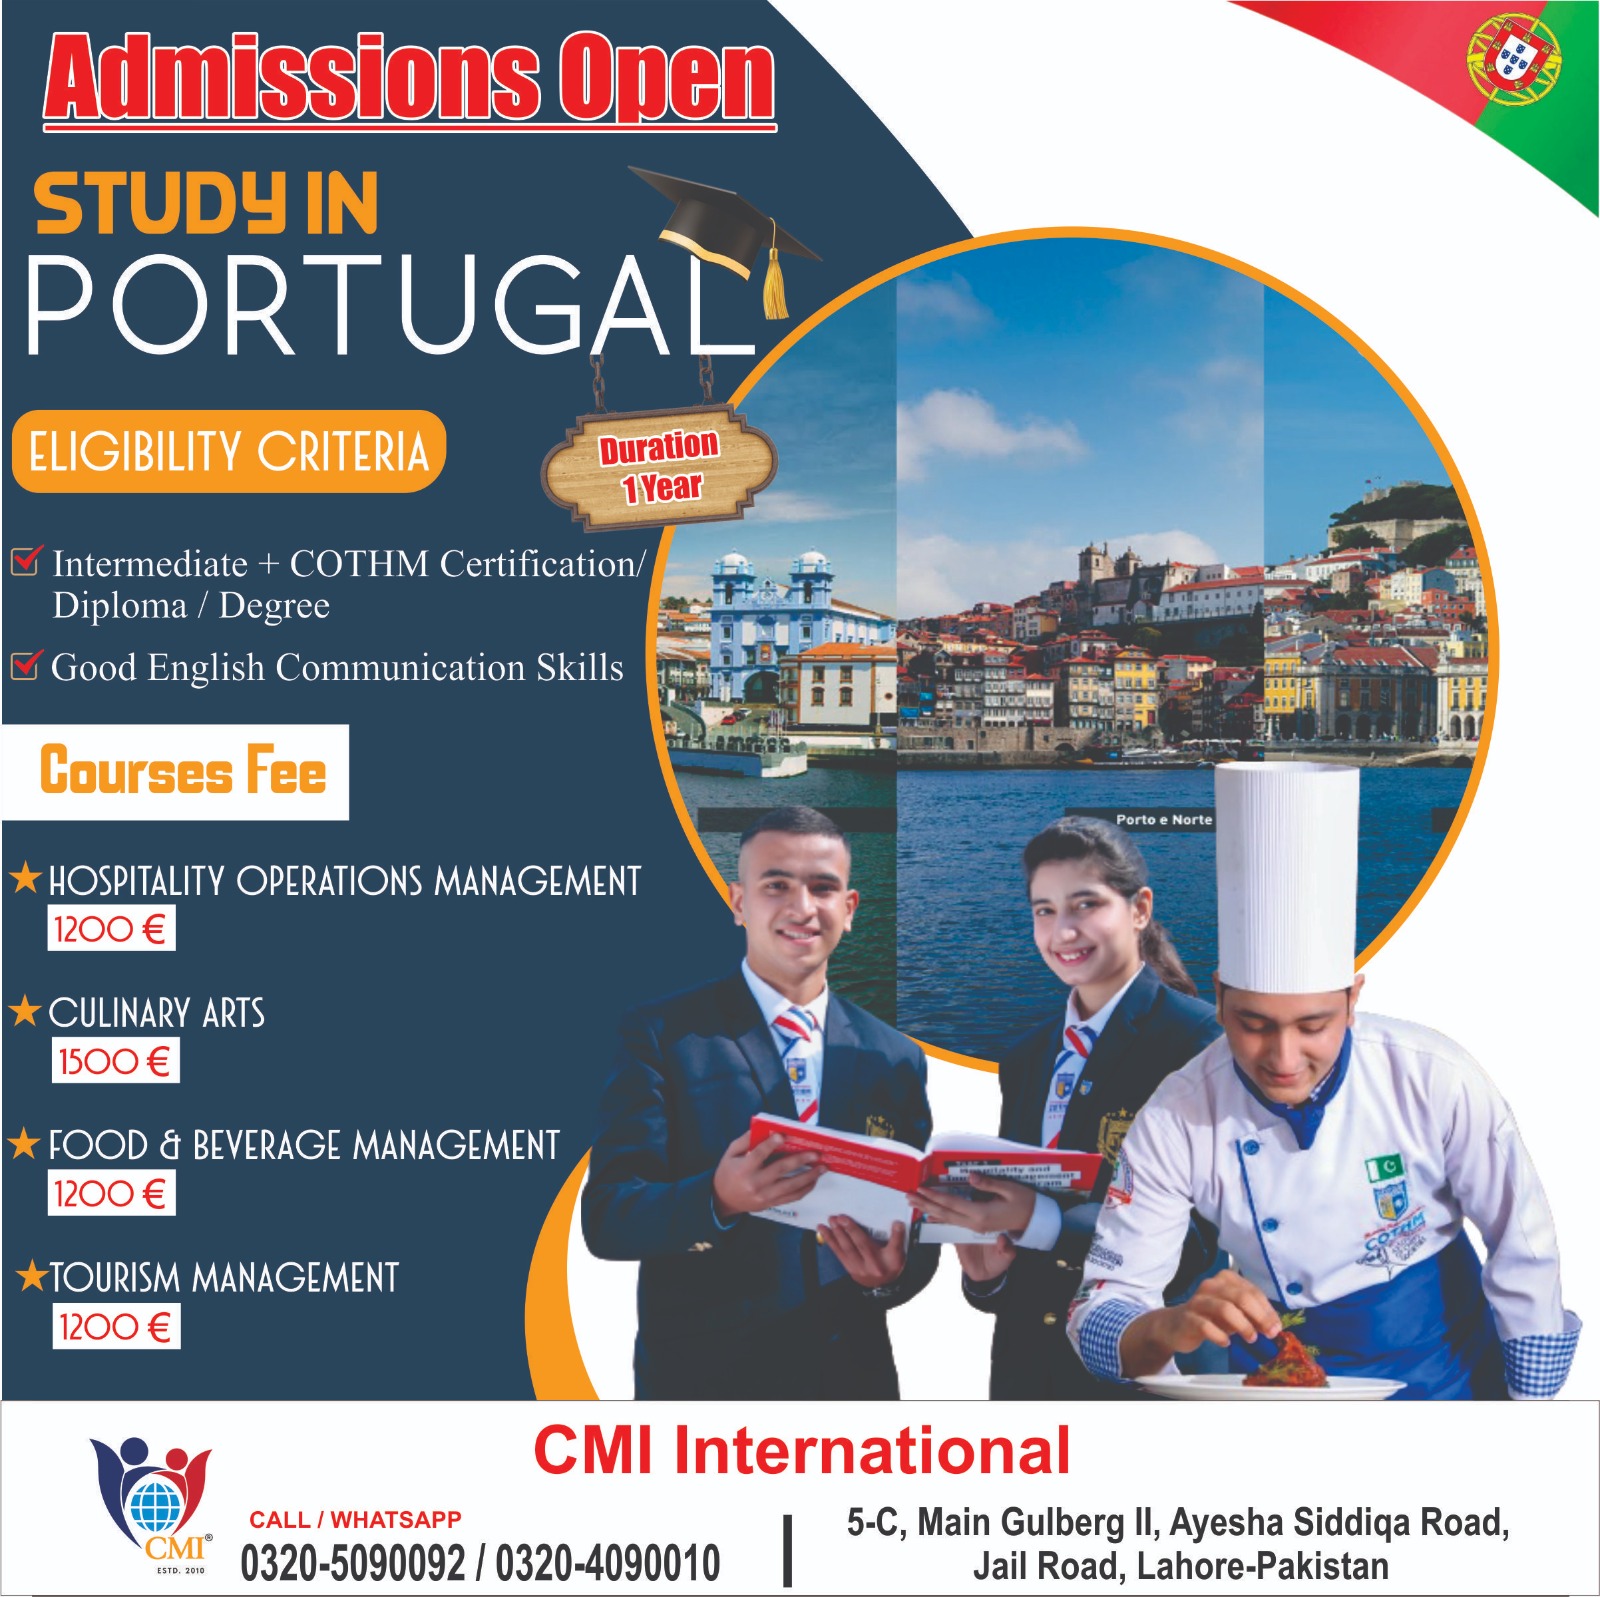 How to Apply for Portugal Student Visa?